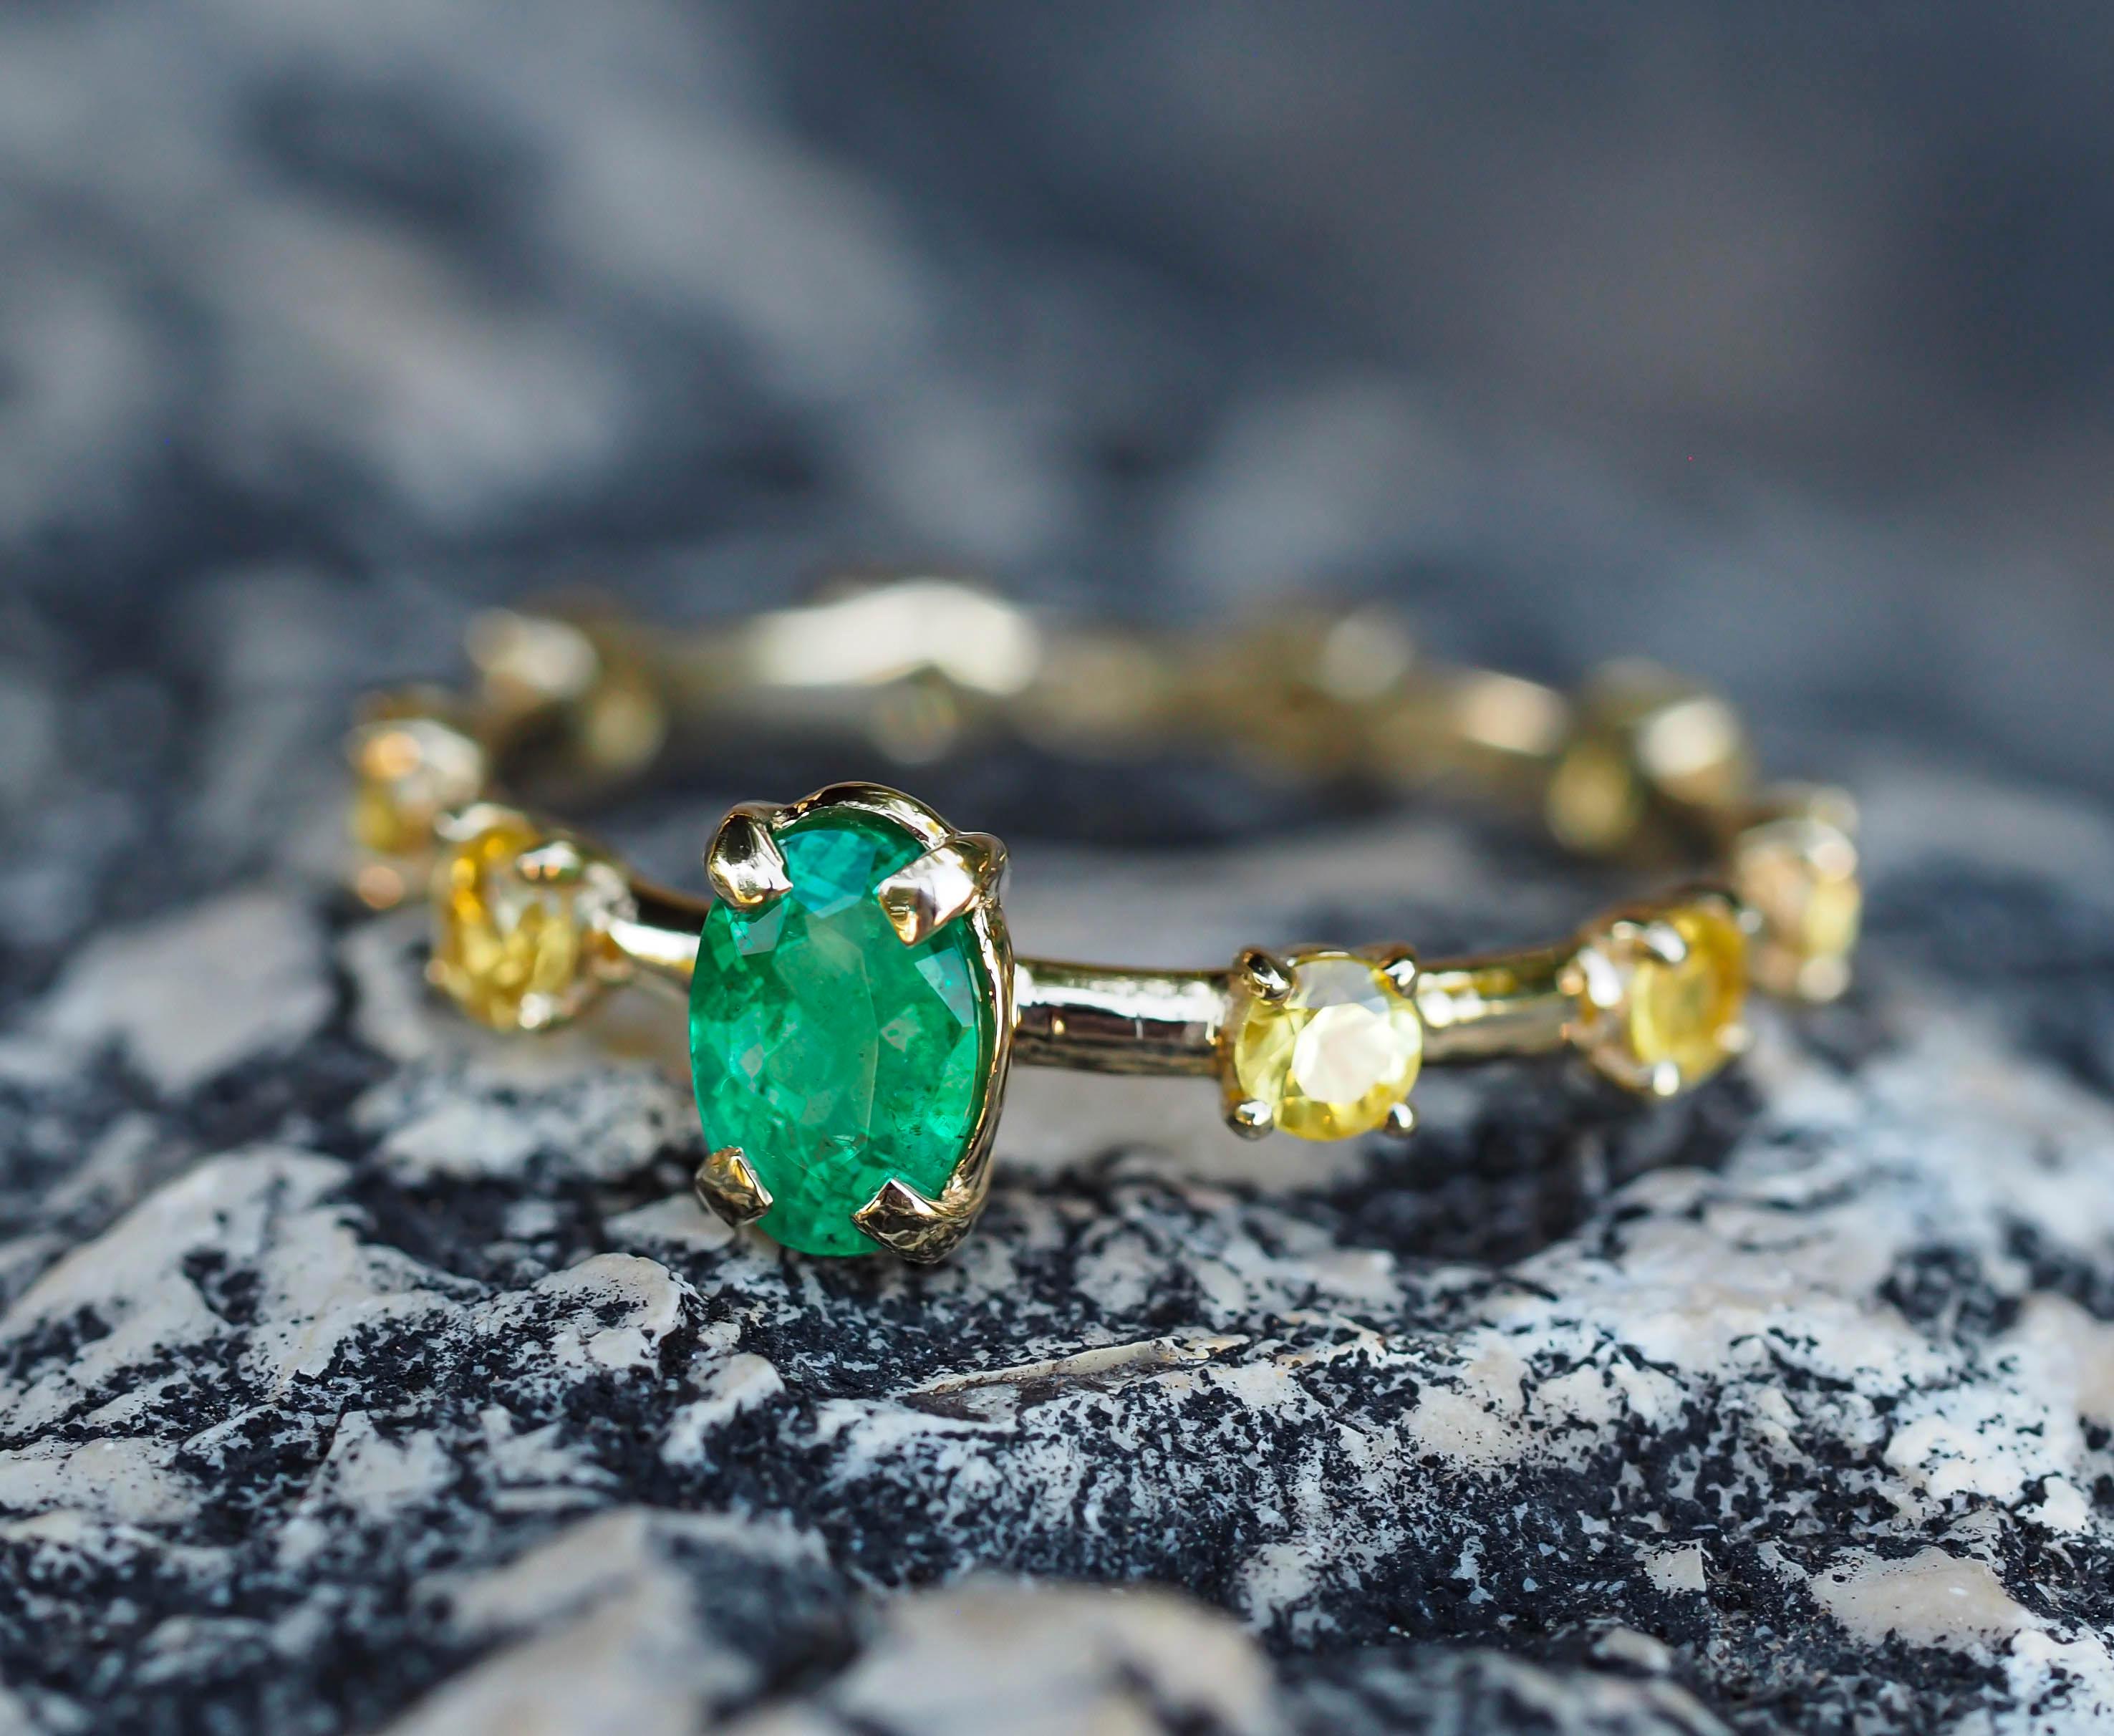 For Sale:  14k Gold Ring with Oval Emerald and Sapphires, Eternity Ring 10